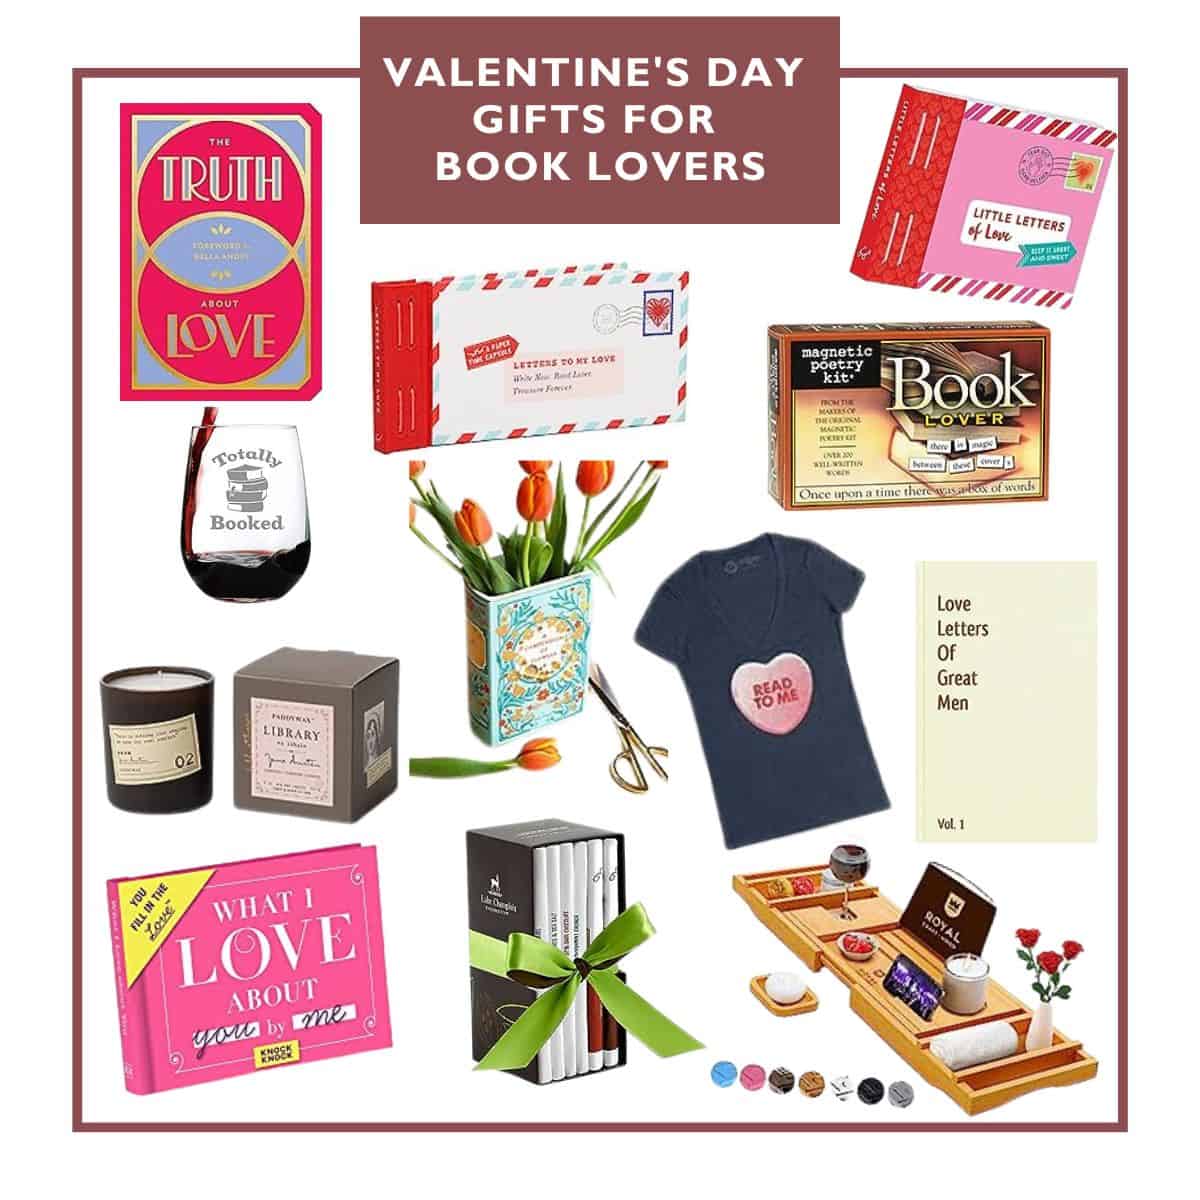 13 Best Valentine’s Day Gifts for Book Lovers